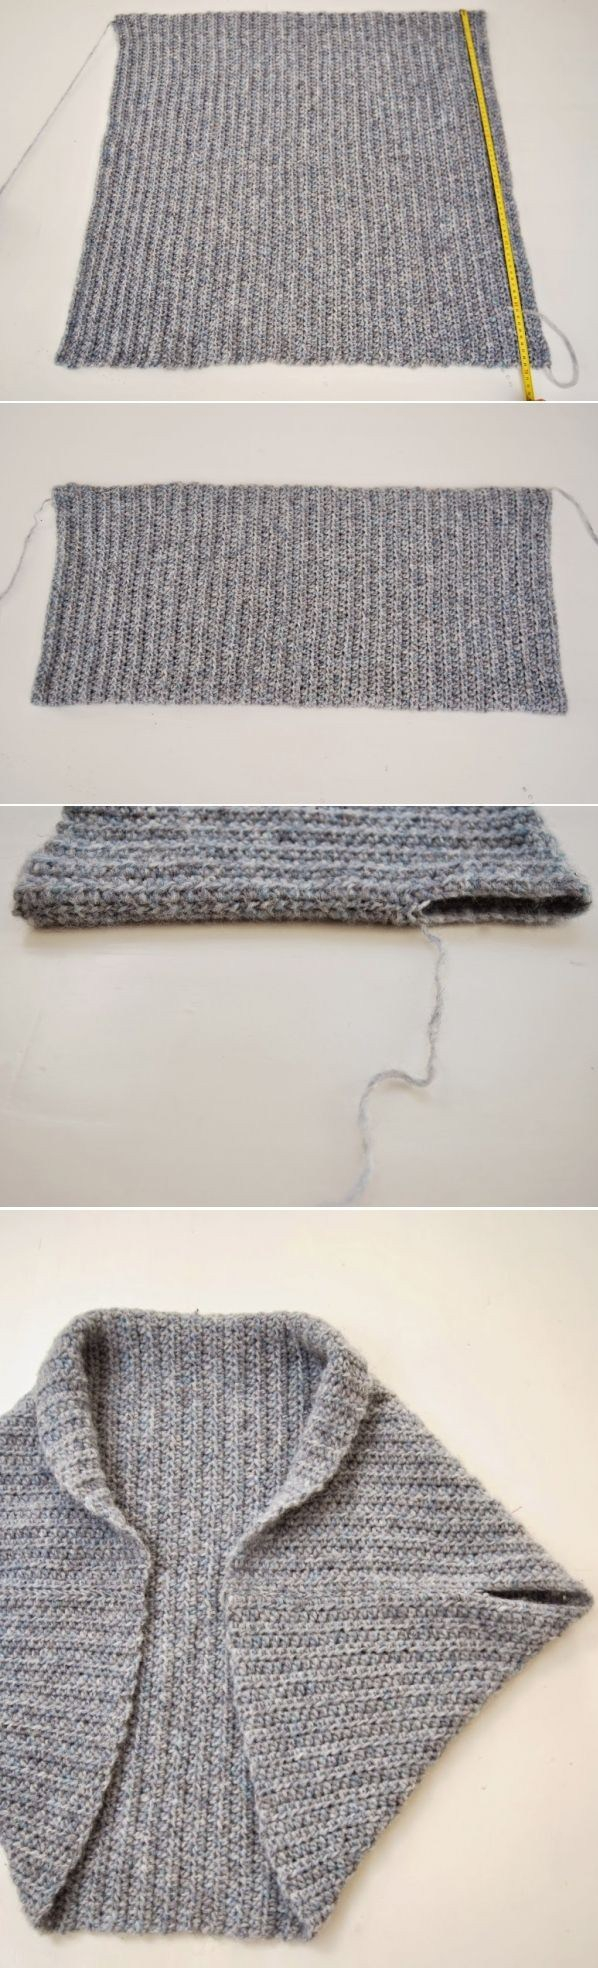 Free Knitting Patterns For Shrugs And Wraps Easy Shrug Knitting Patterns In The Loop Knitting